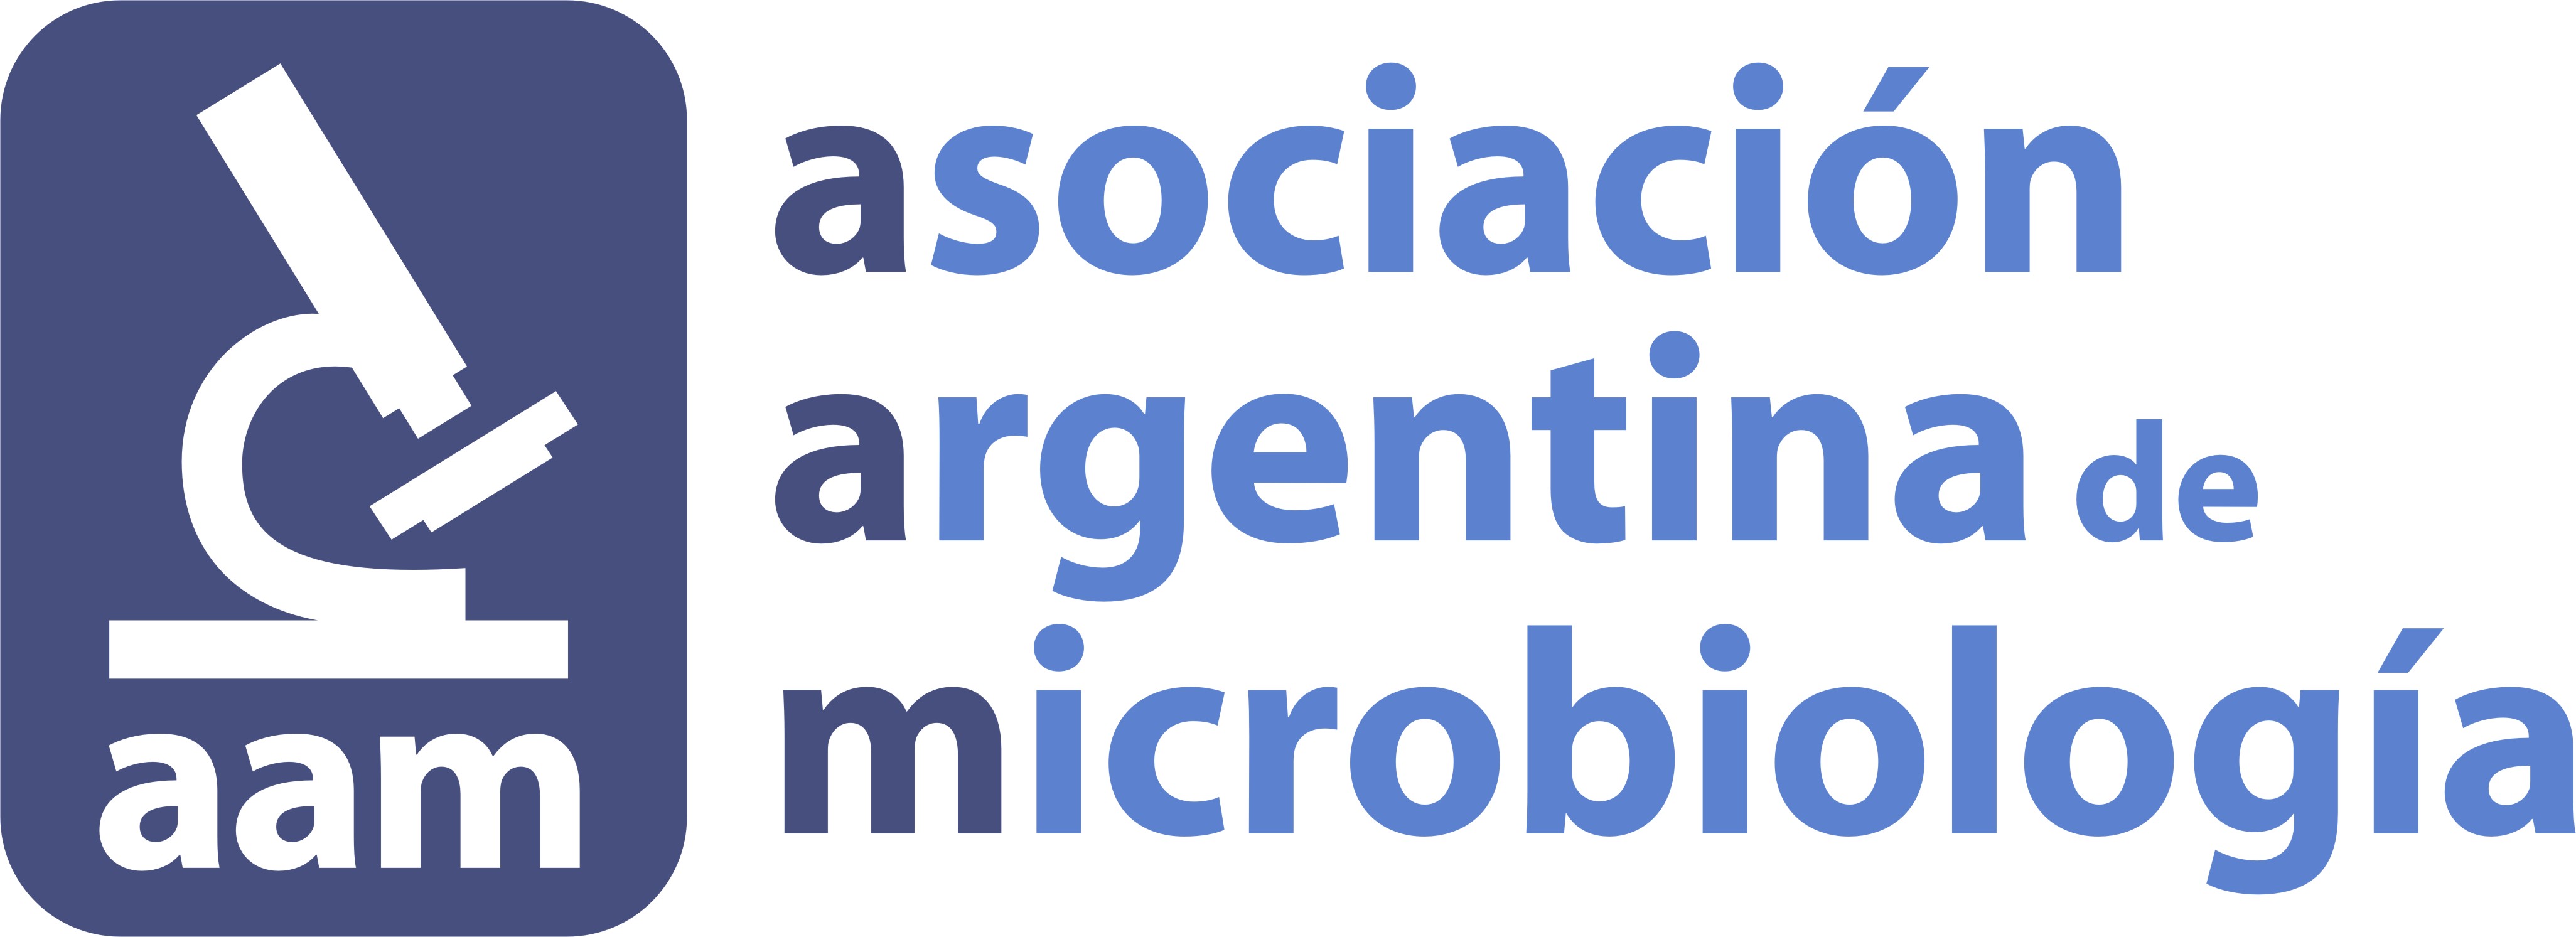 Argentine Association of Microbiology (AAM) - Buenos Aires Argentina